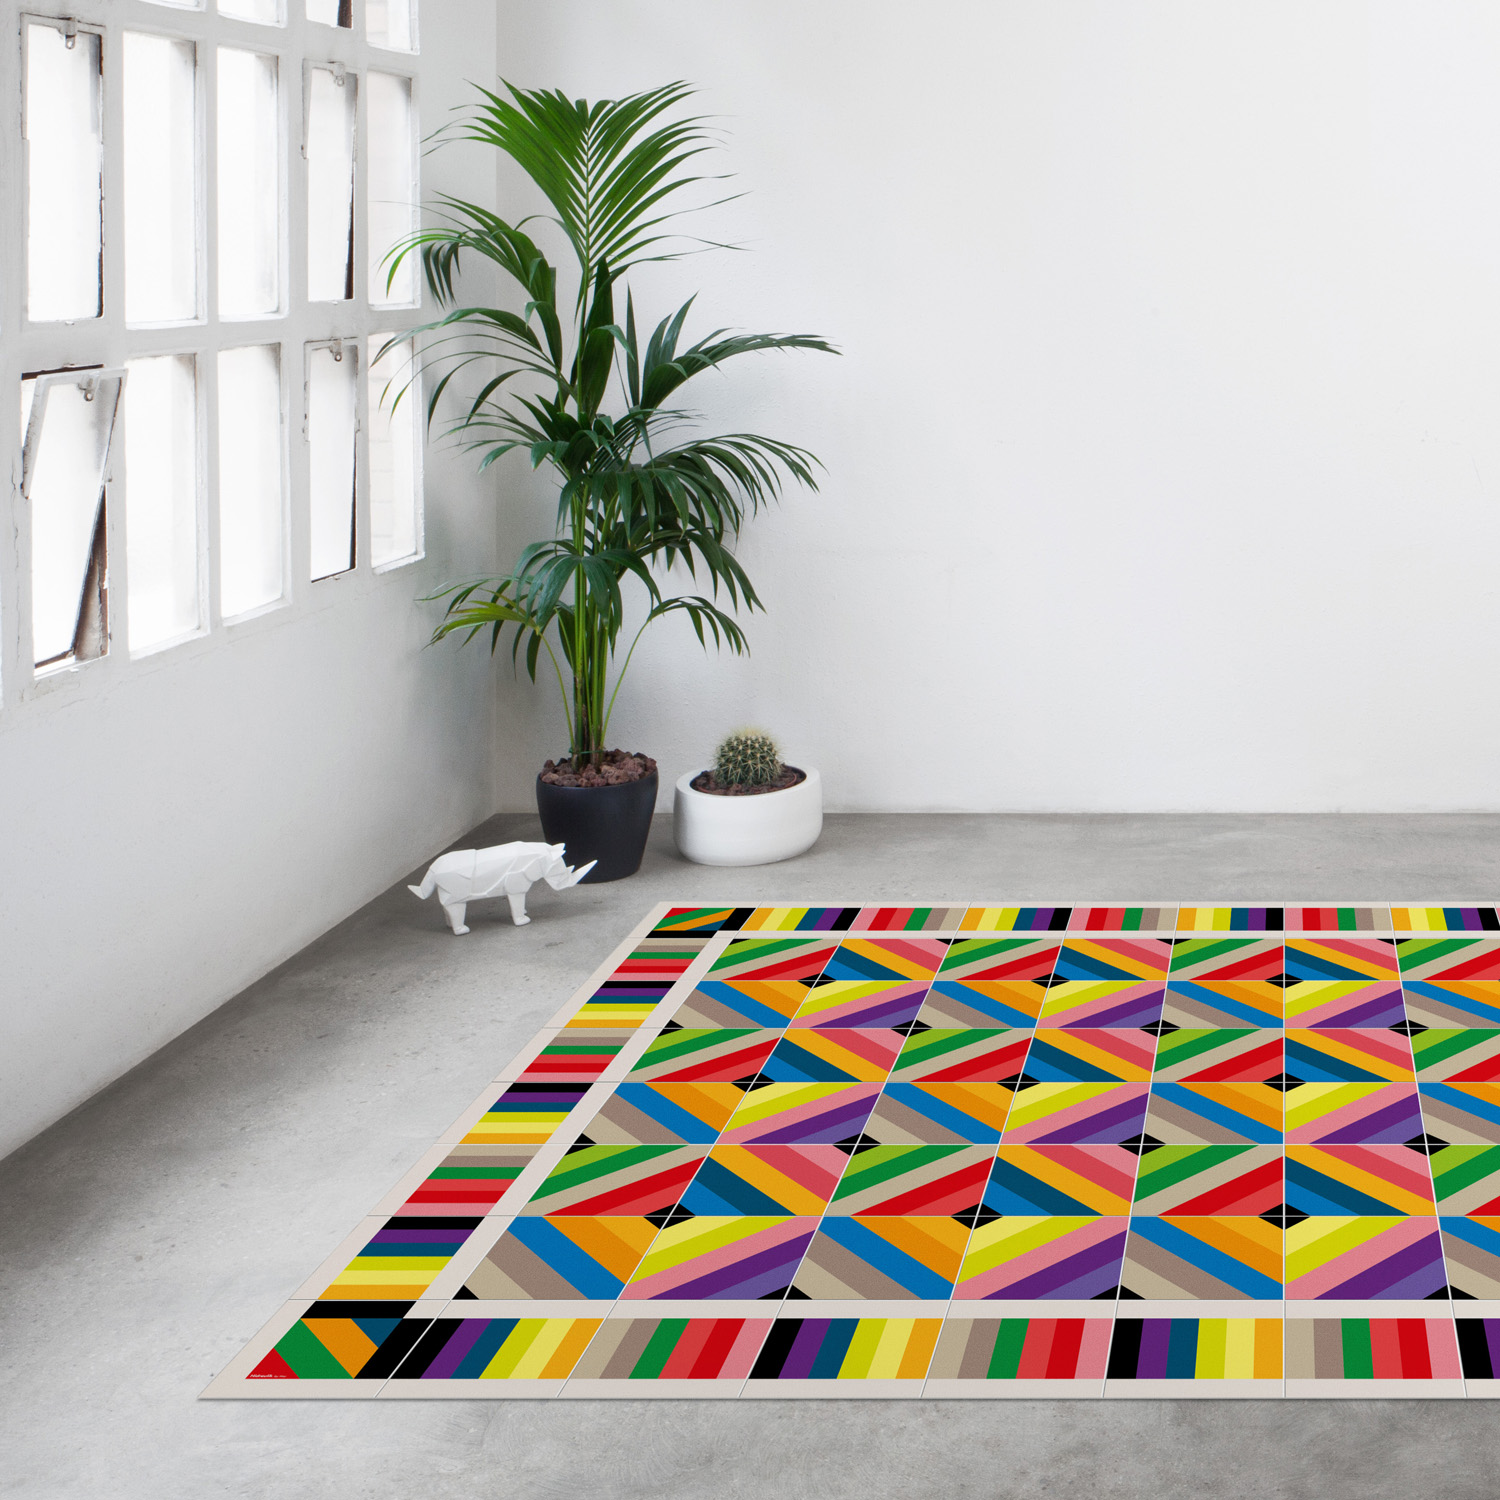 Hidraulik x Hey, a new range of 100% PVC floor and table mats inspired by 20th century modernism